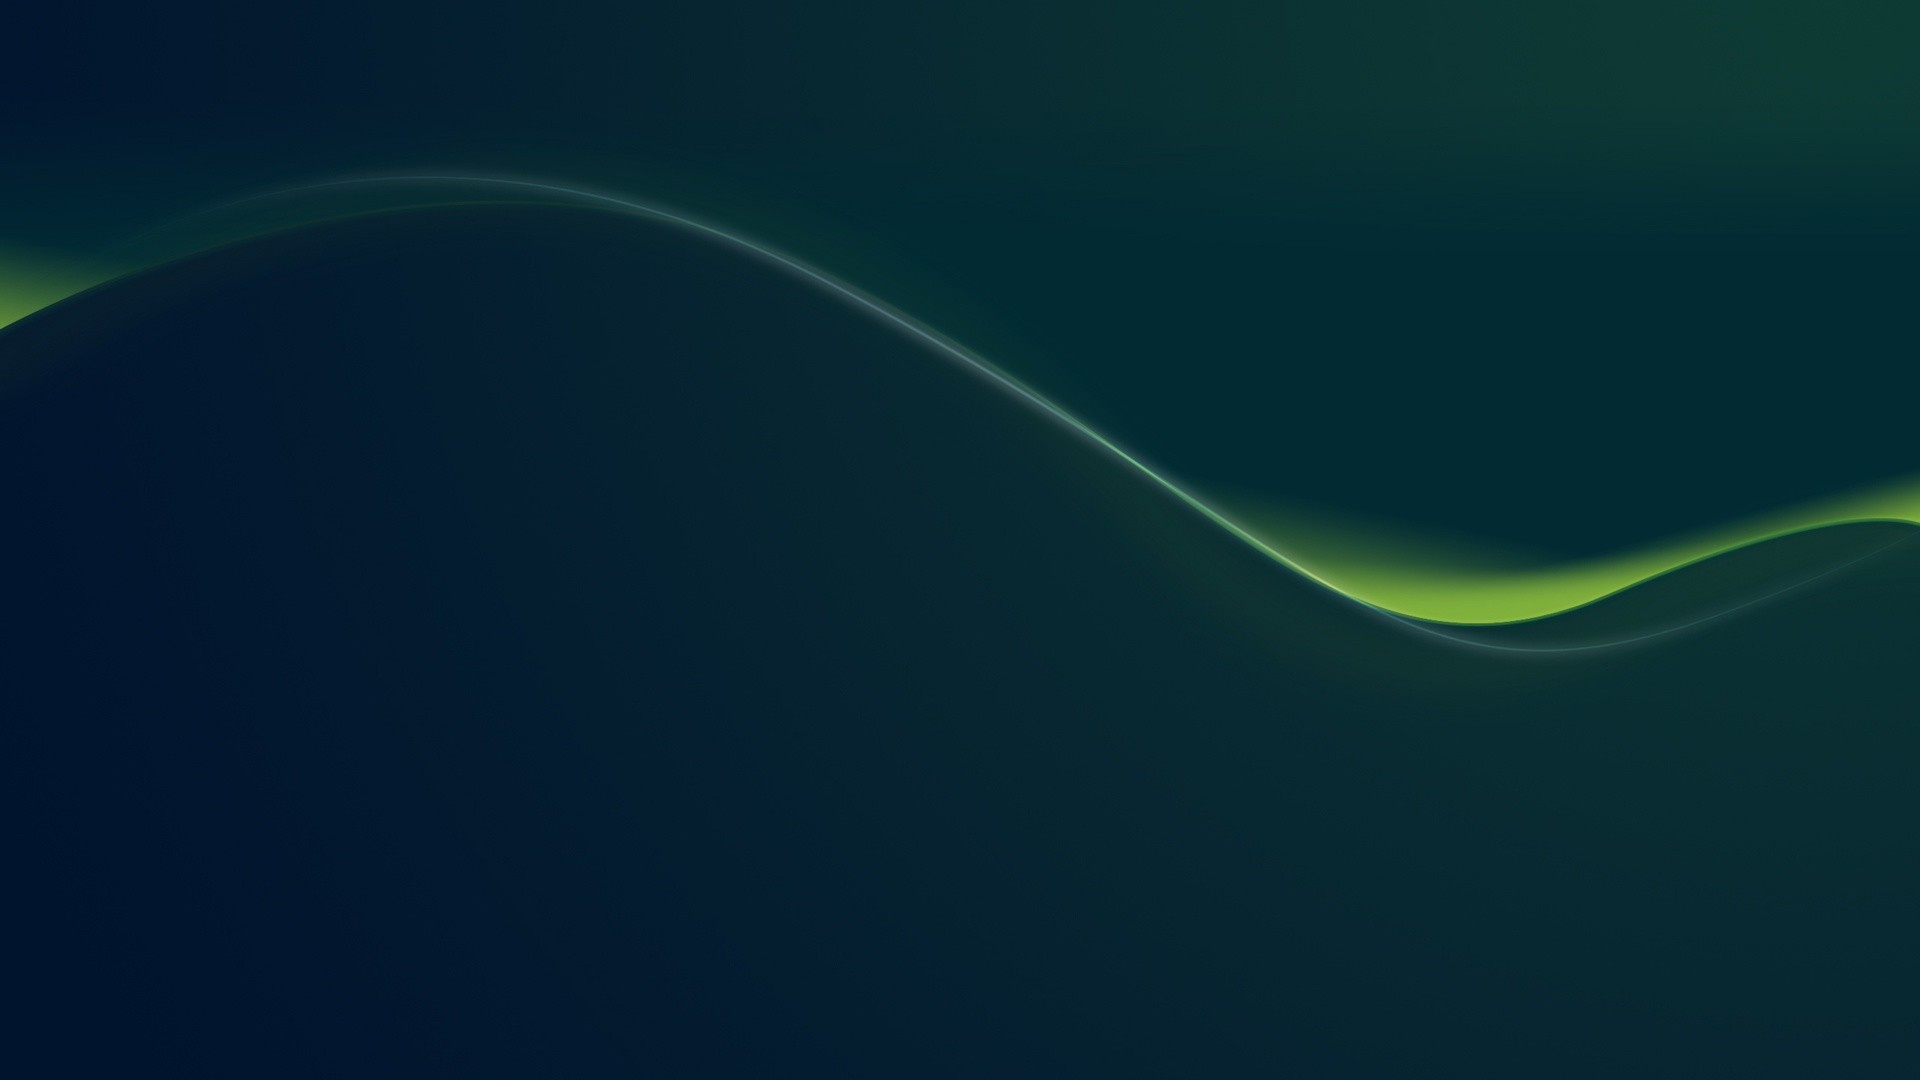 Green Flow. How to set wallpaper on your desktop Click the download link from above and set the wallpaper on the desktop from your OS